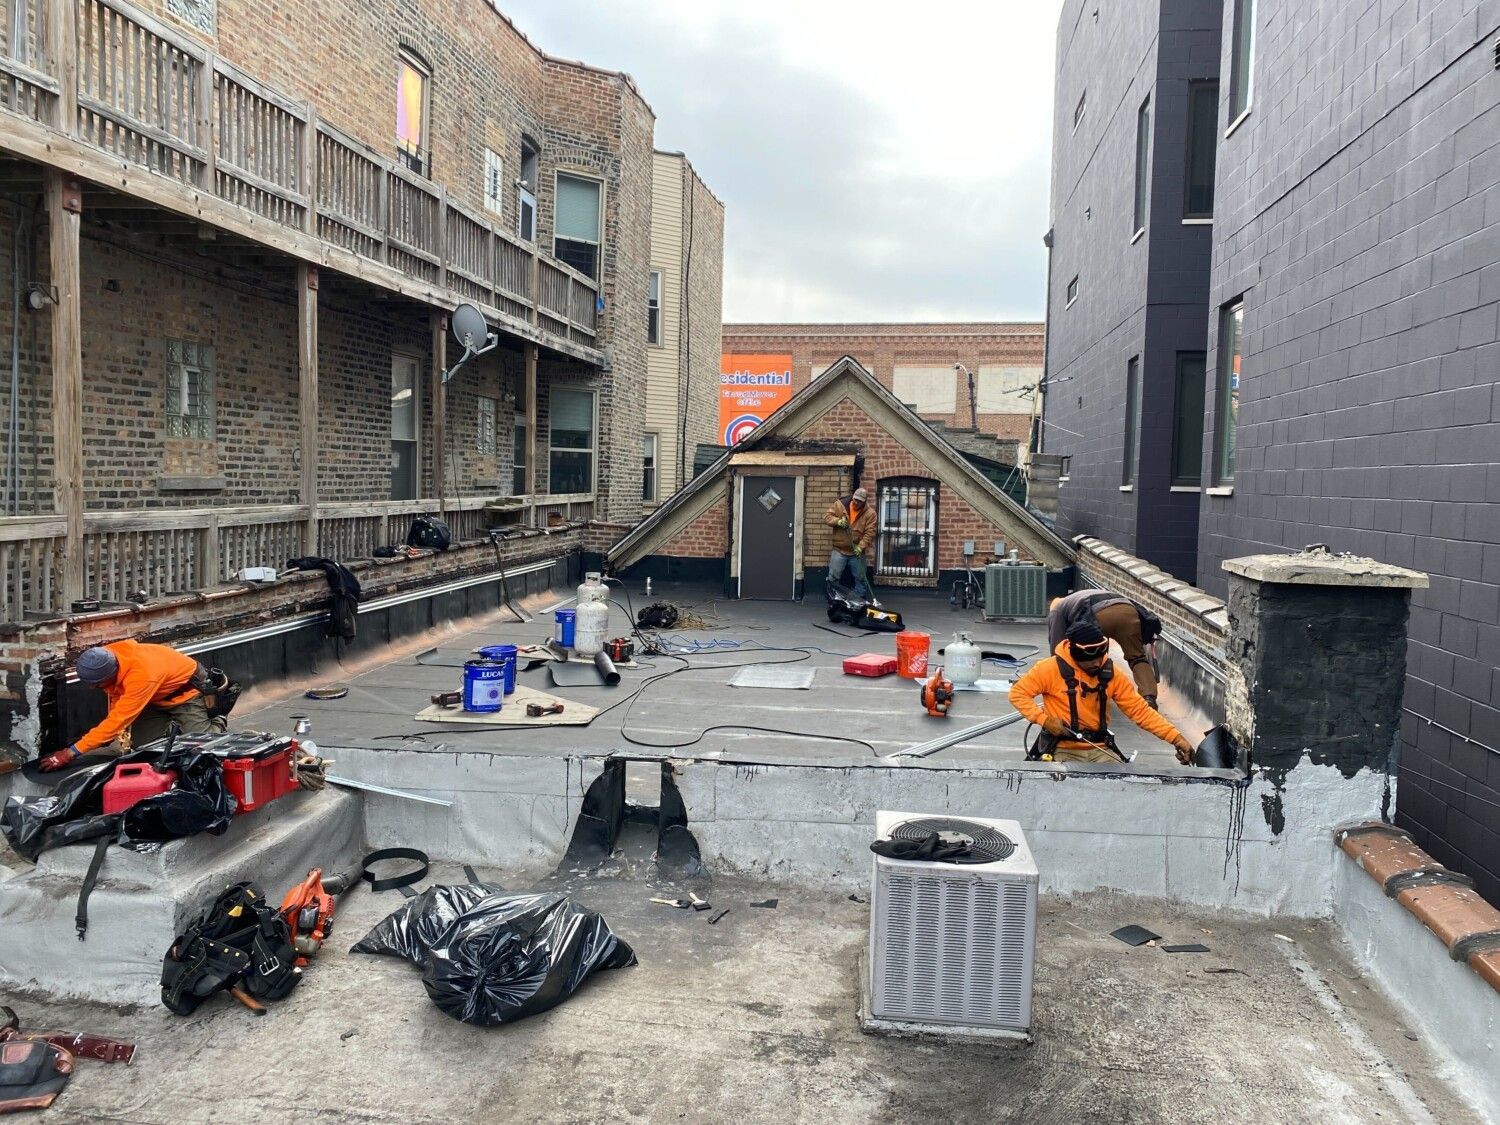 A group of men are working on the roof of a building.